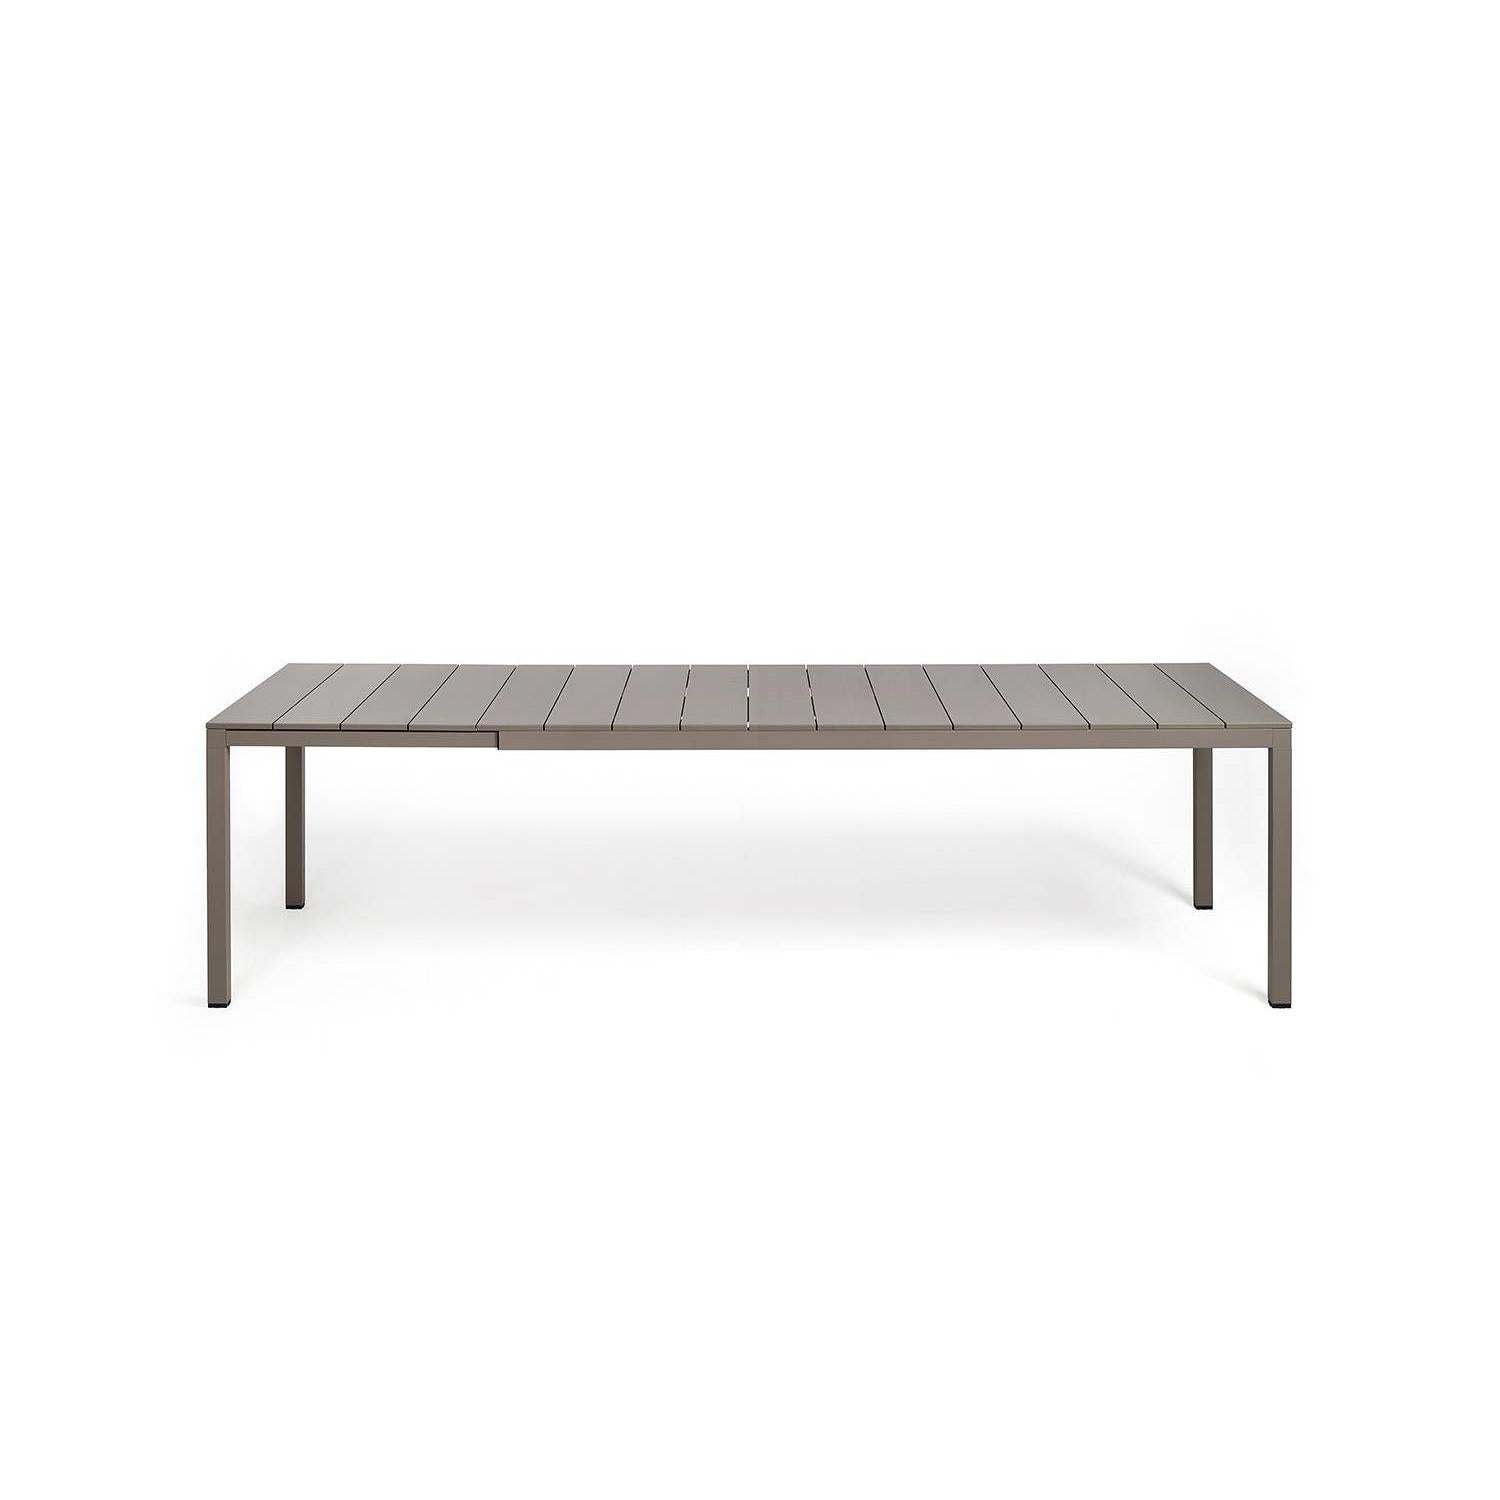 NARDI RIO ALU 210 Extending Outdoor Dining Table [8-10 Seater] - 3 colours